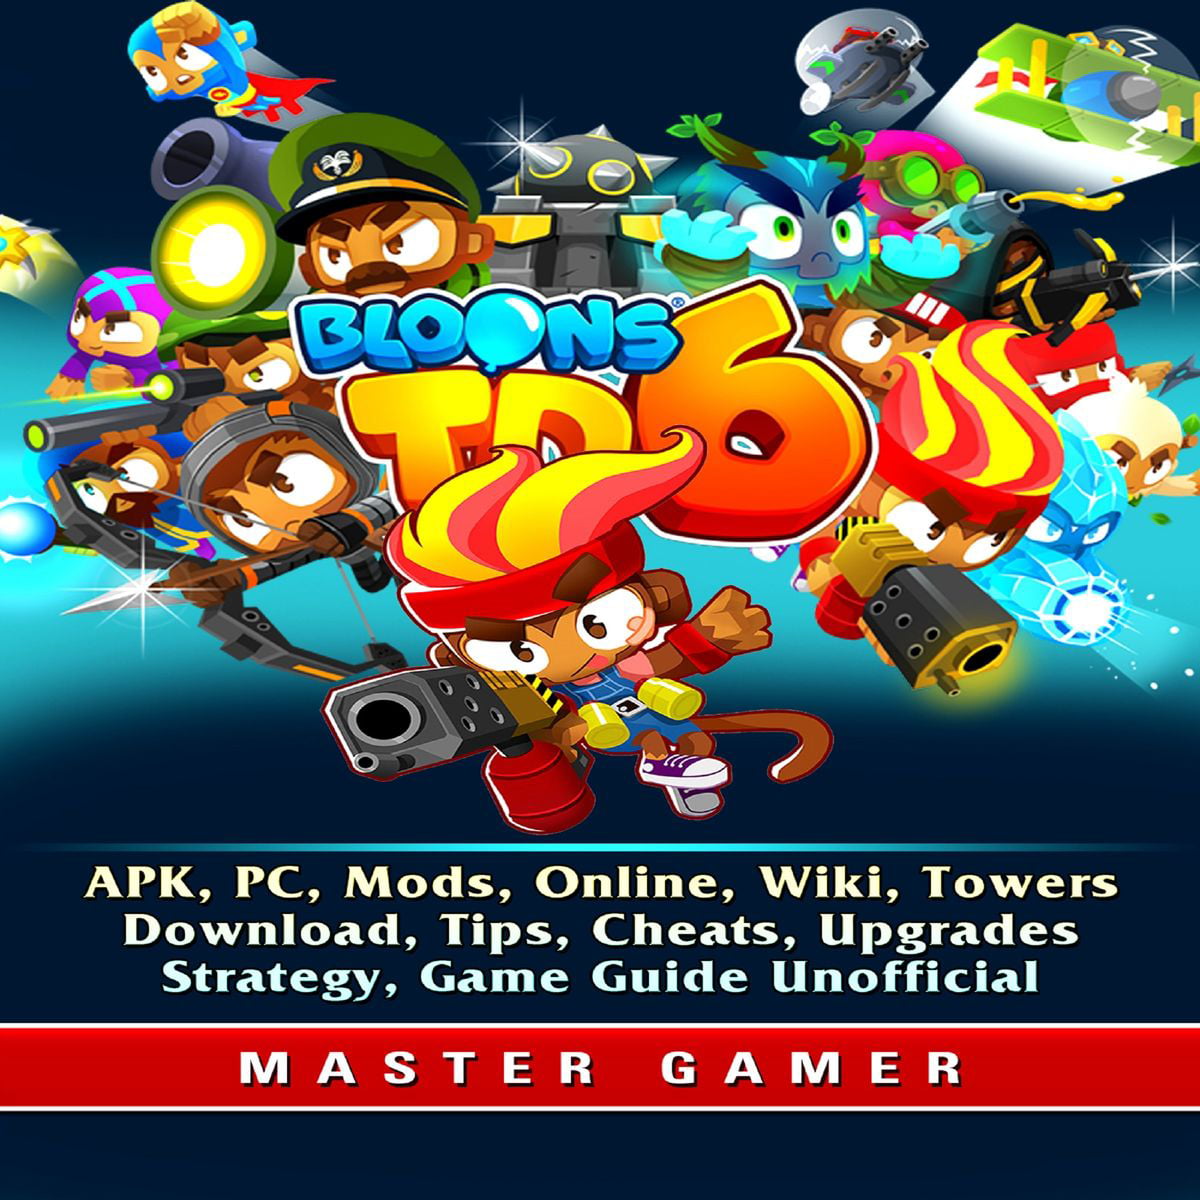 bloons td 6 cheat engine android